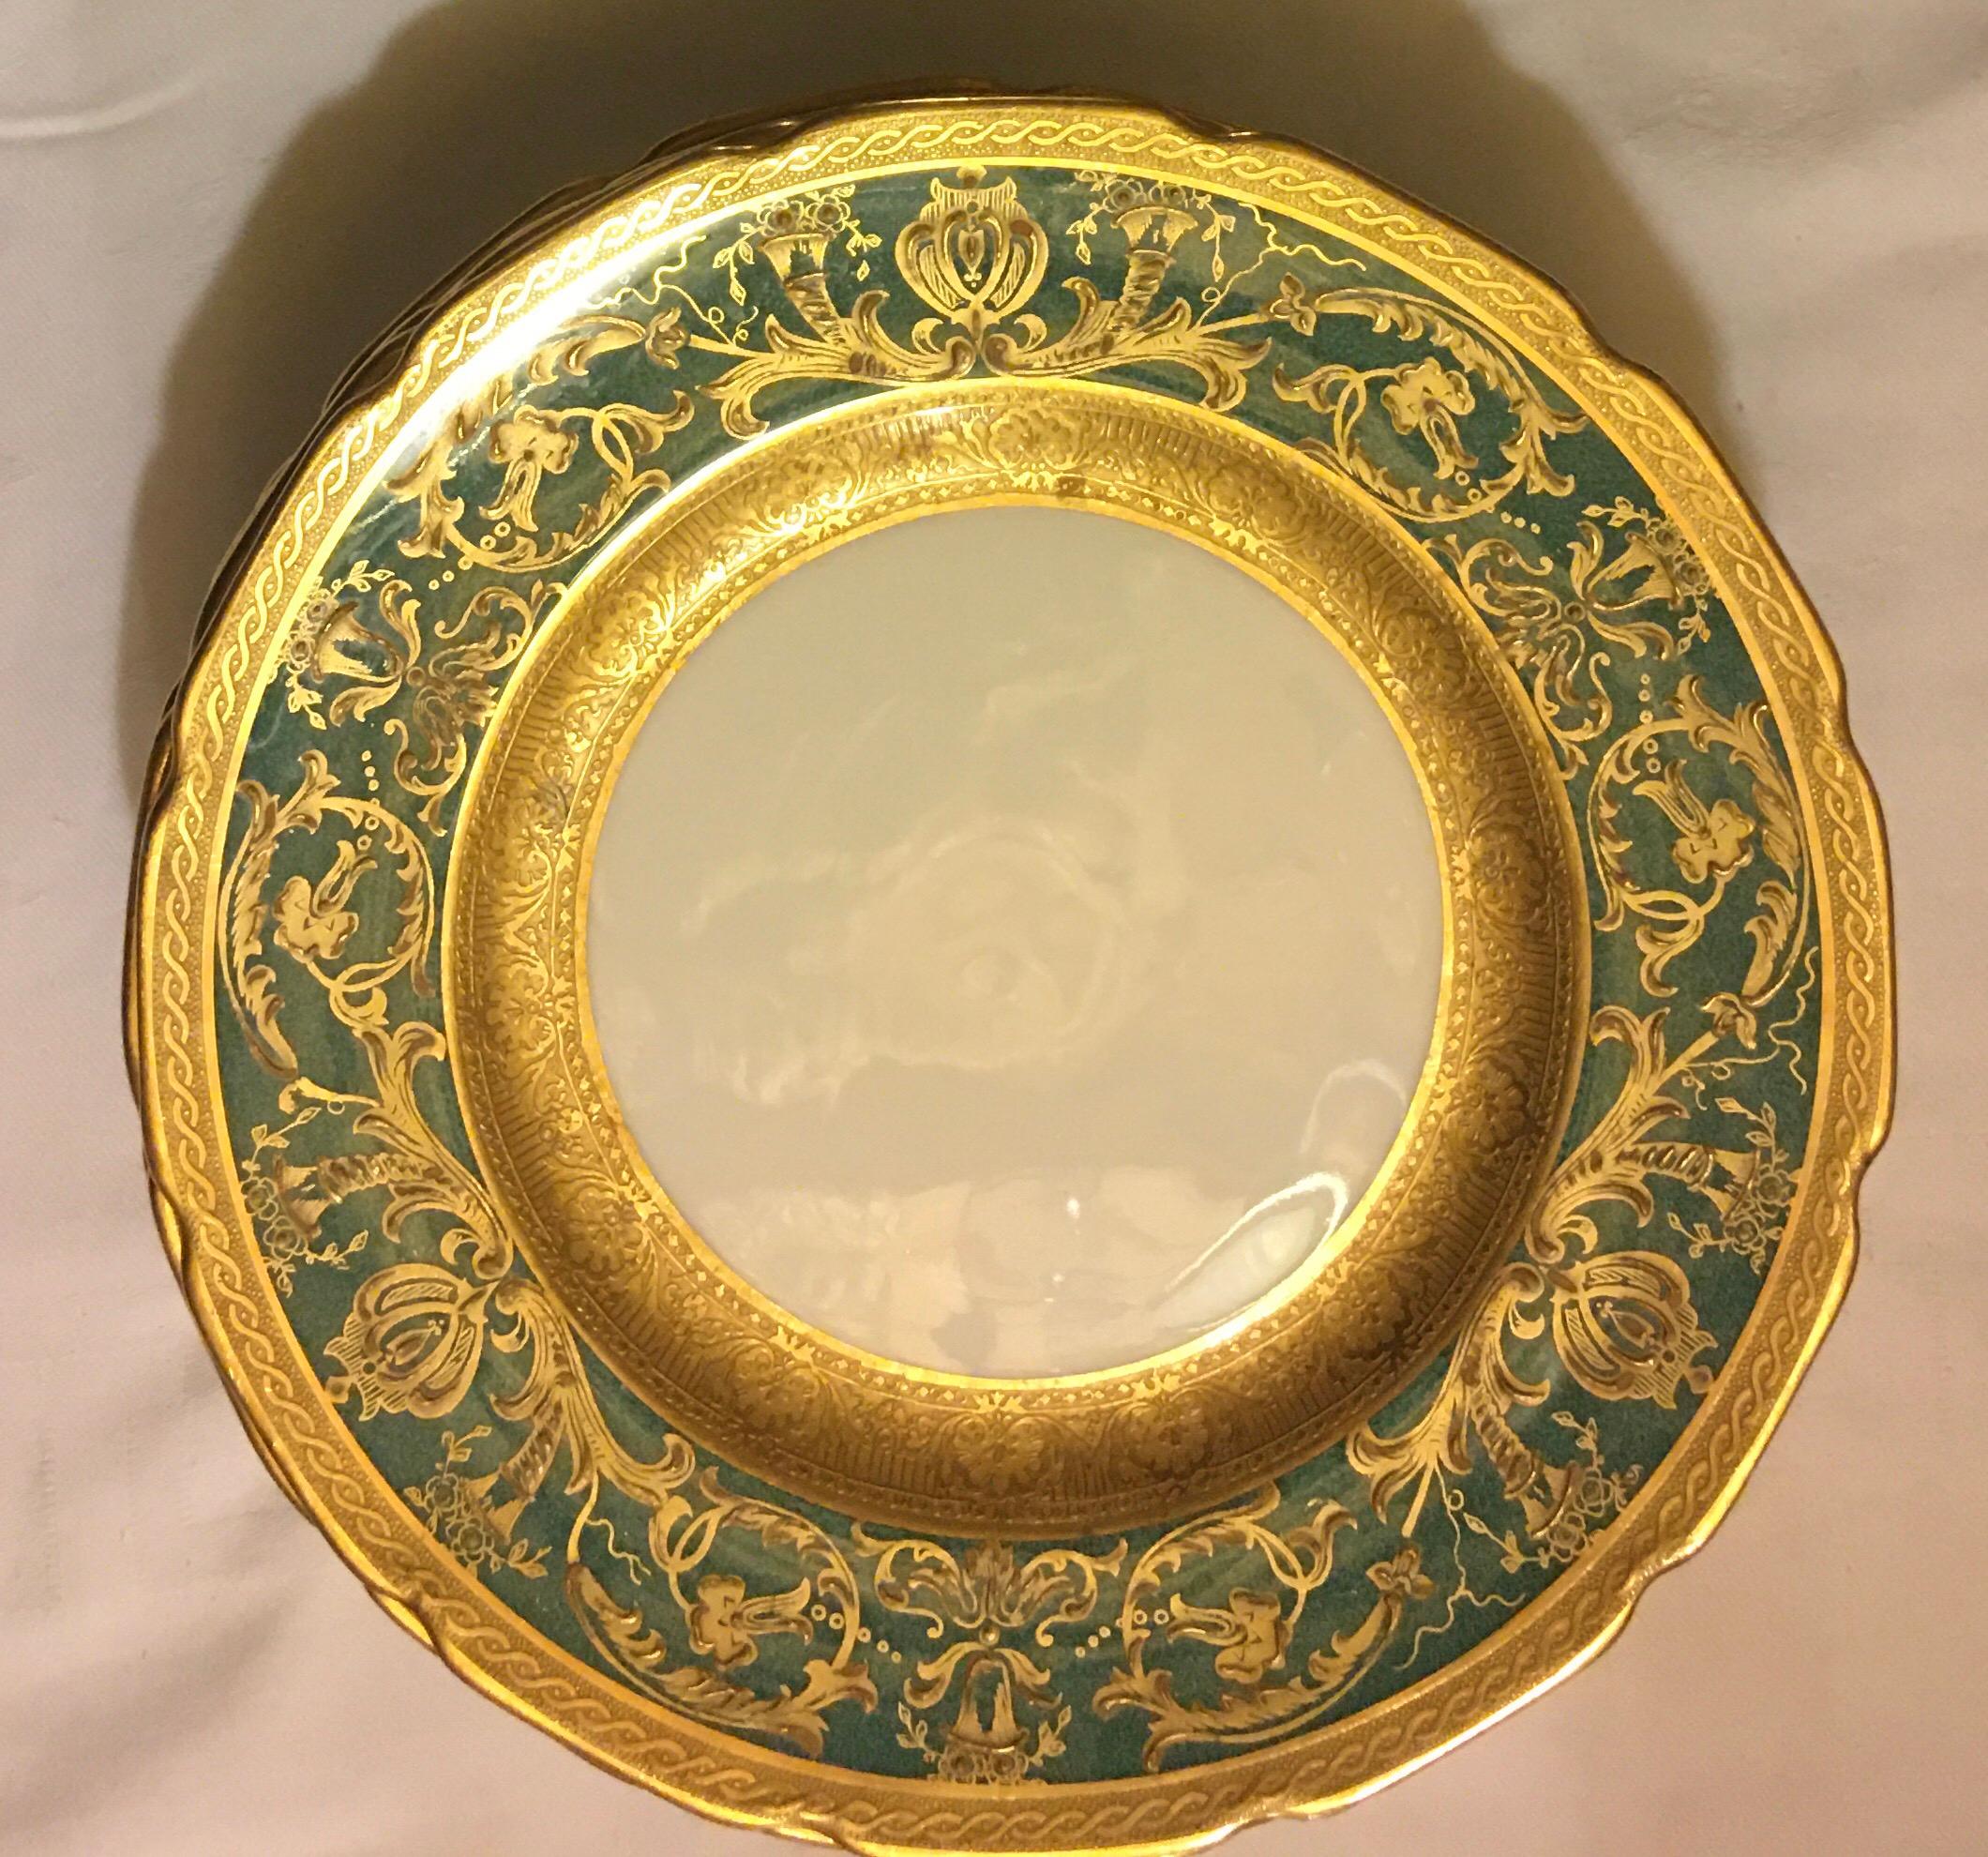 teal and gold plates